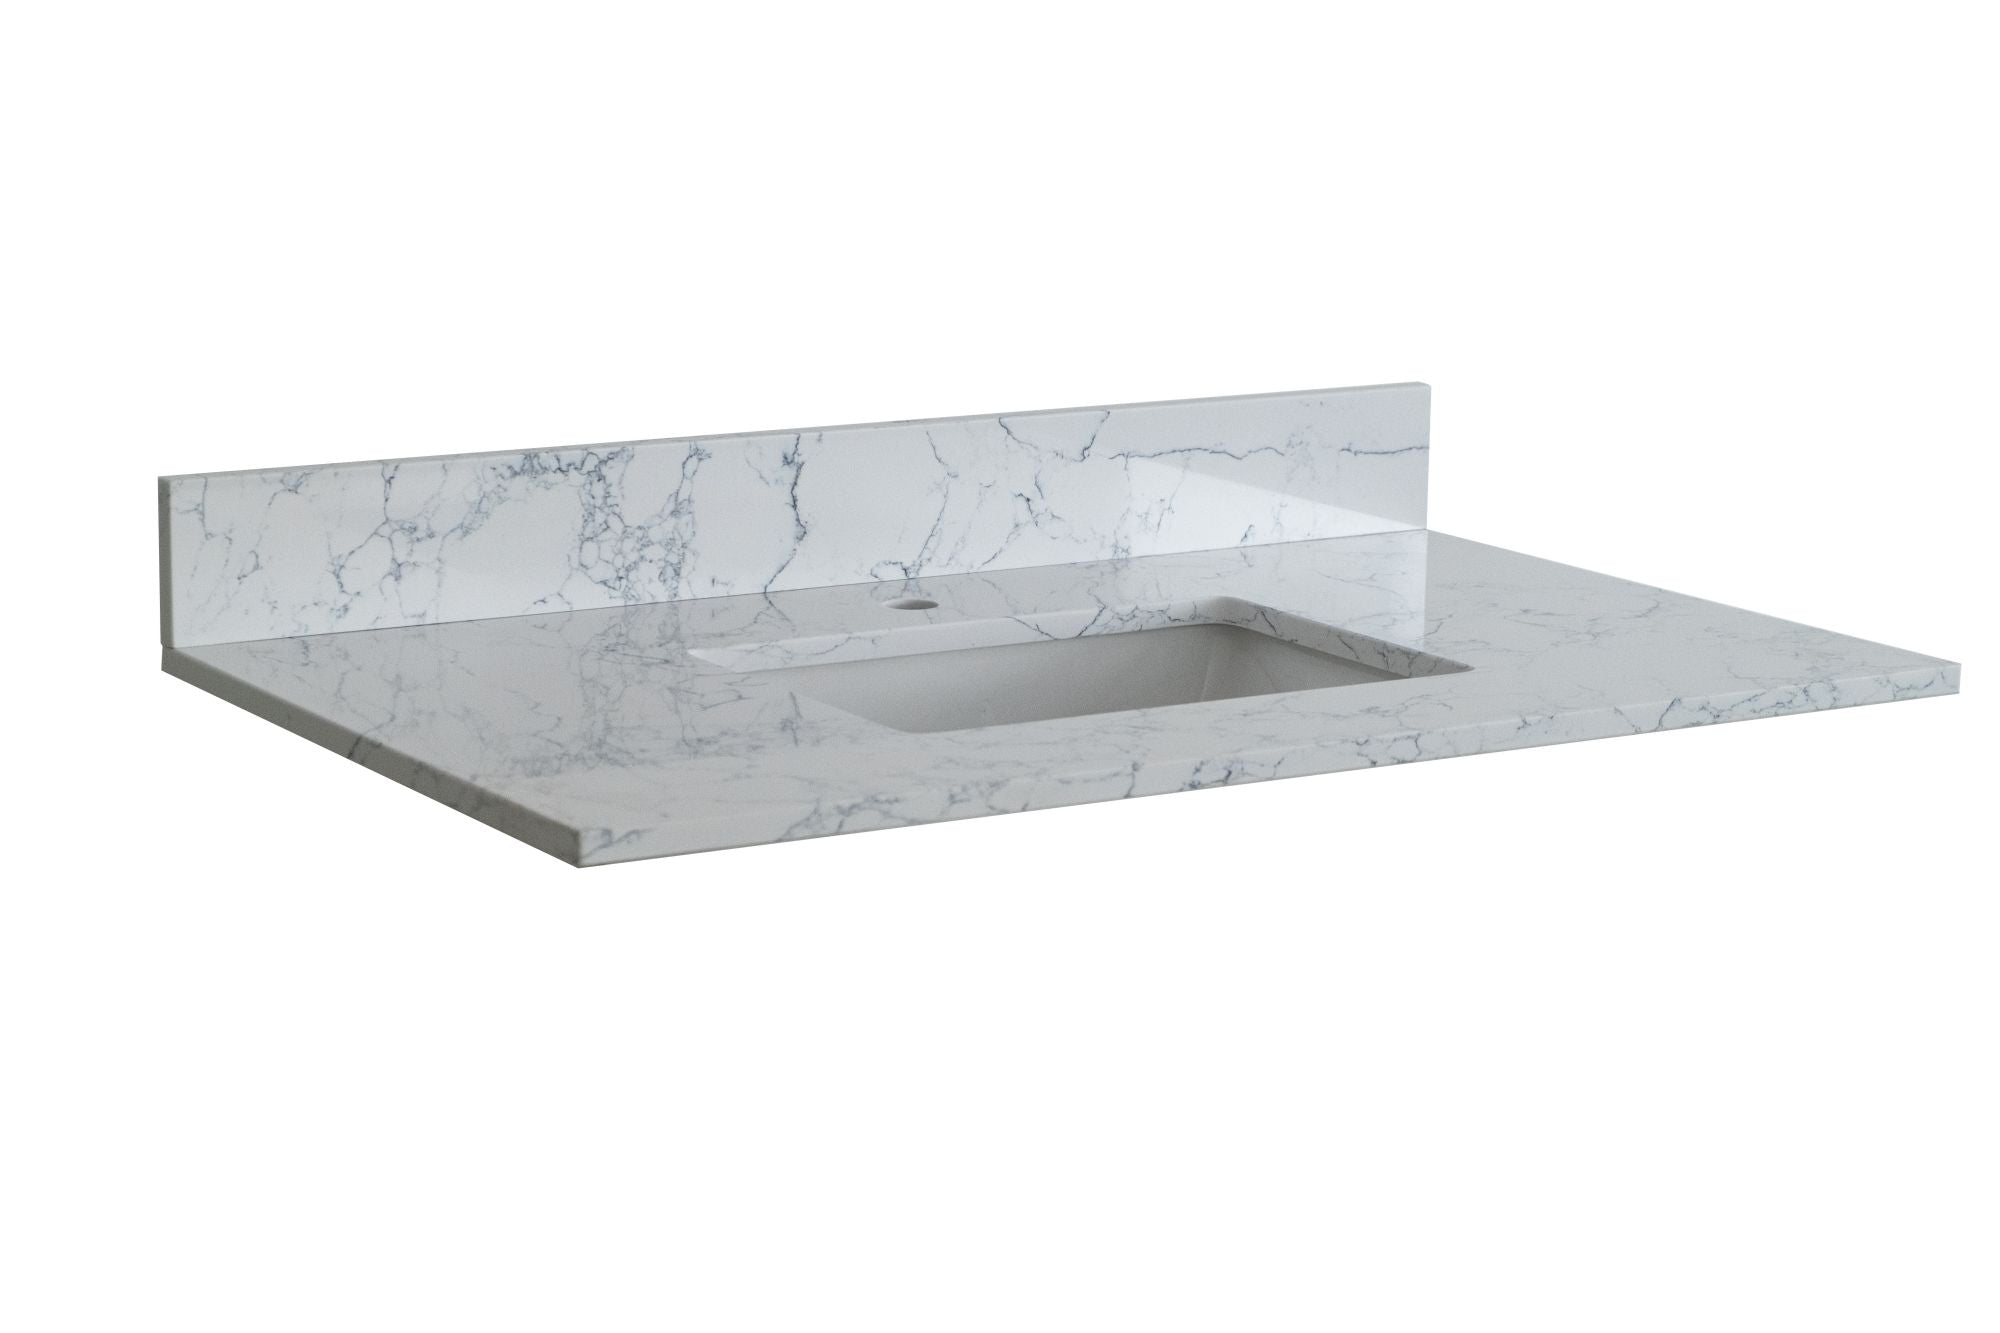 31"x 22" bathroom stone vanity top Carrara  jade engineered marble color with undermount ceramic sink and single faucet hole with backsplash